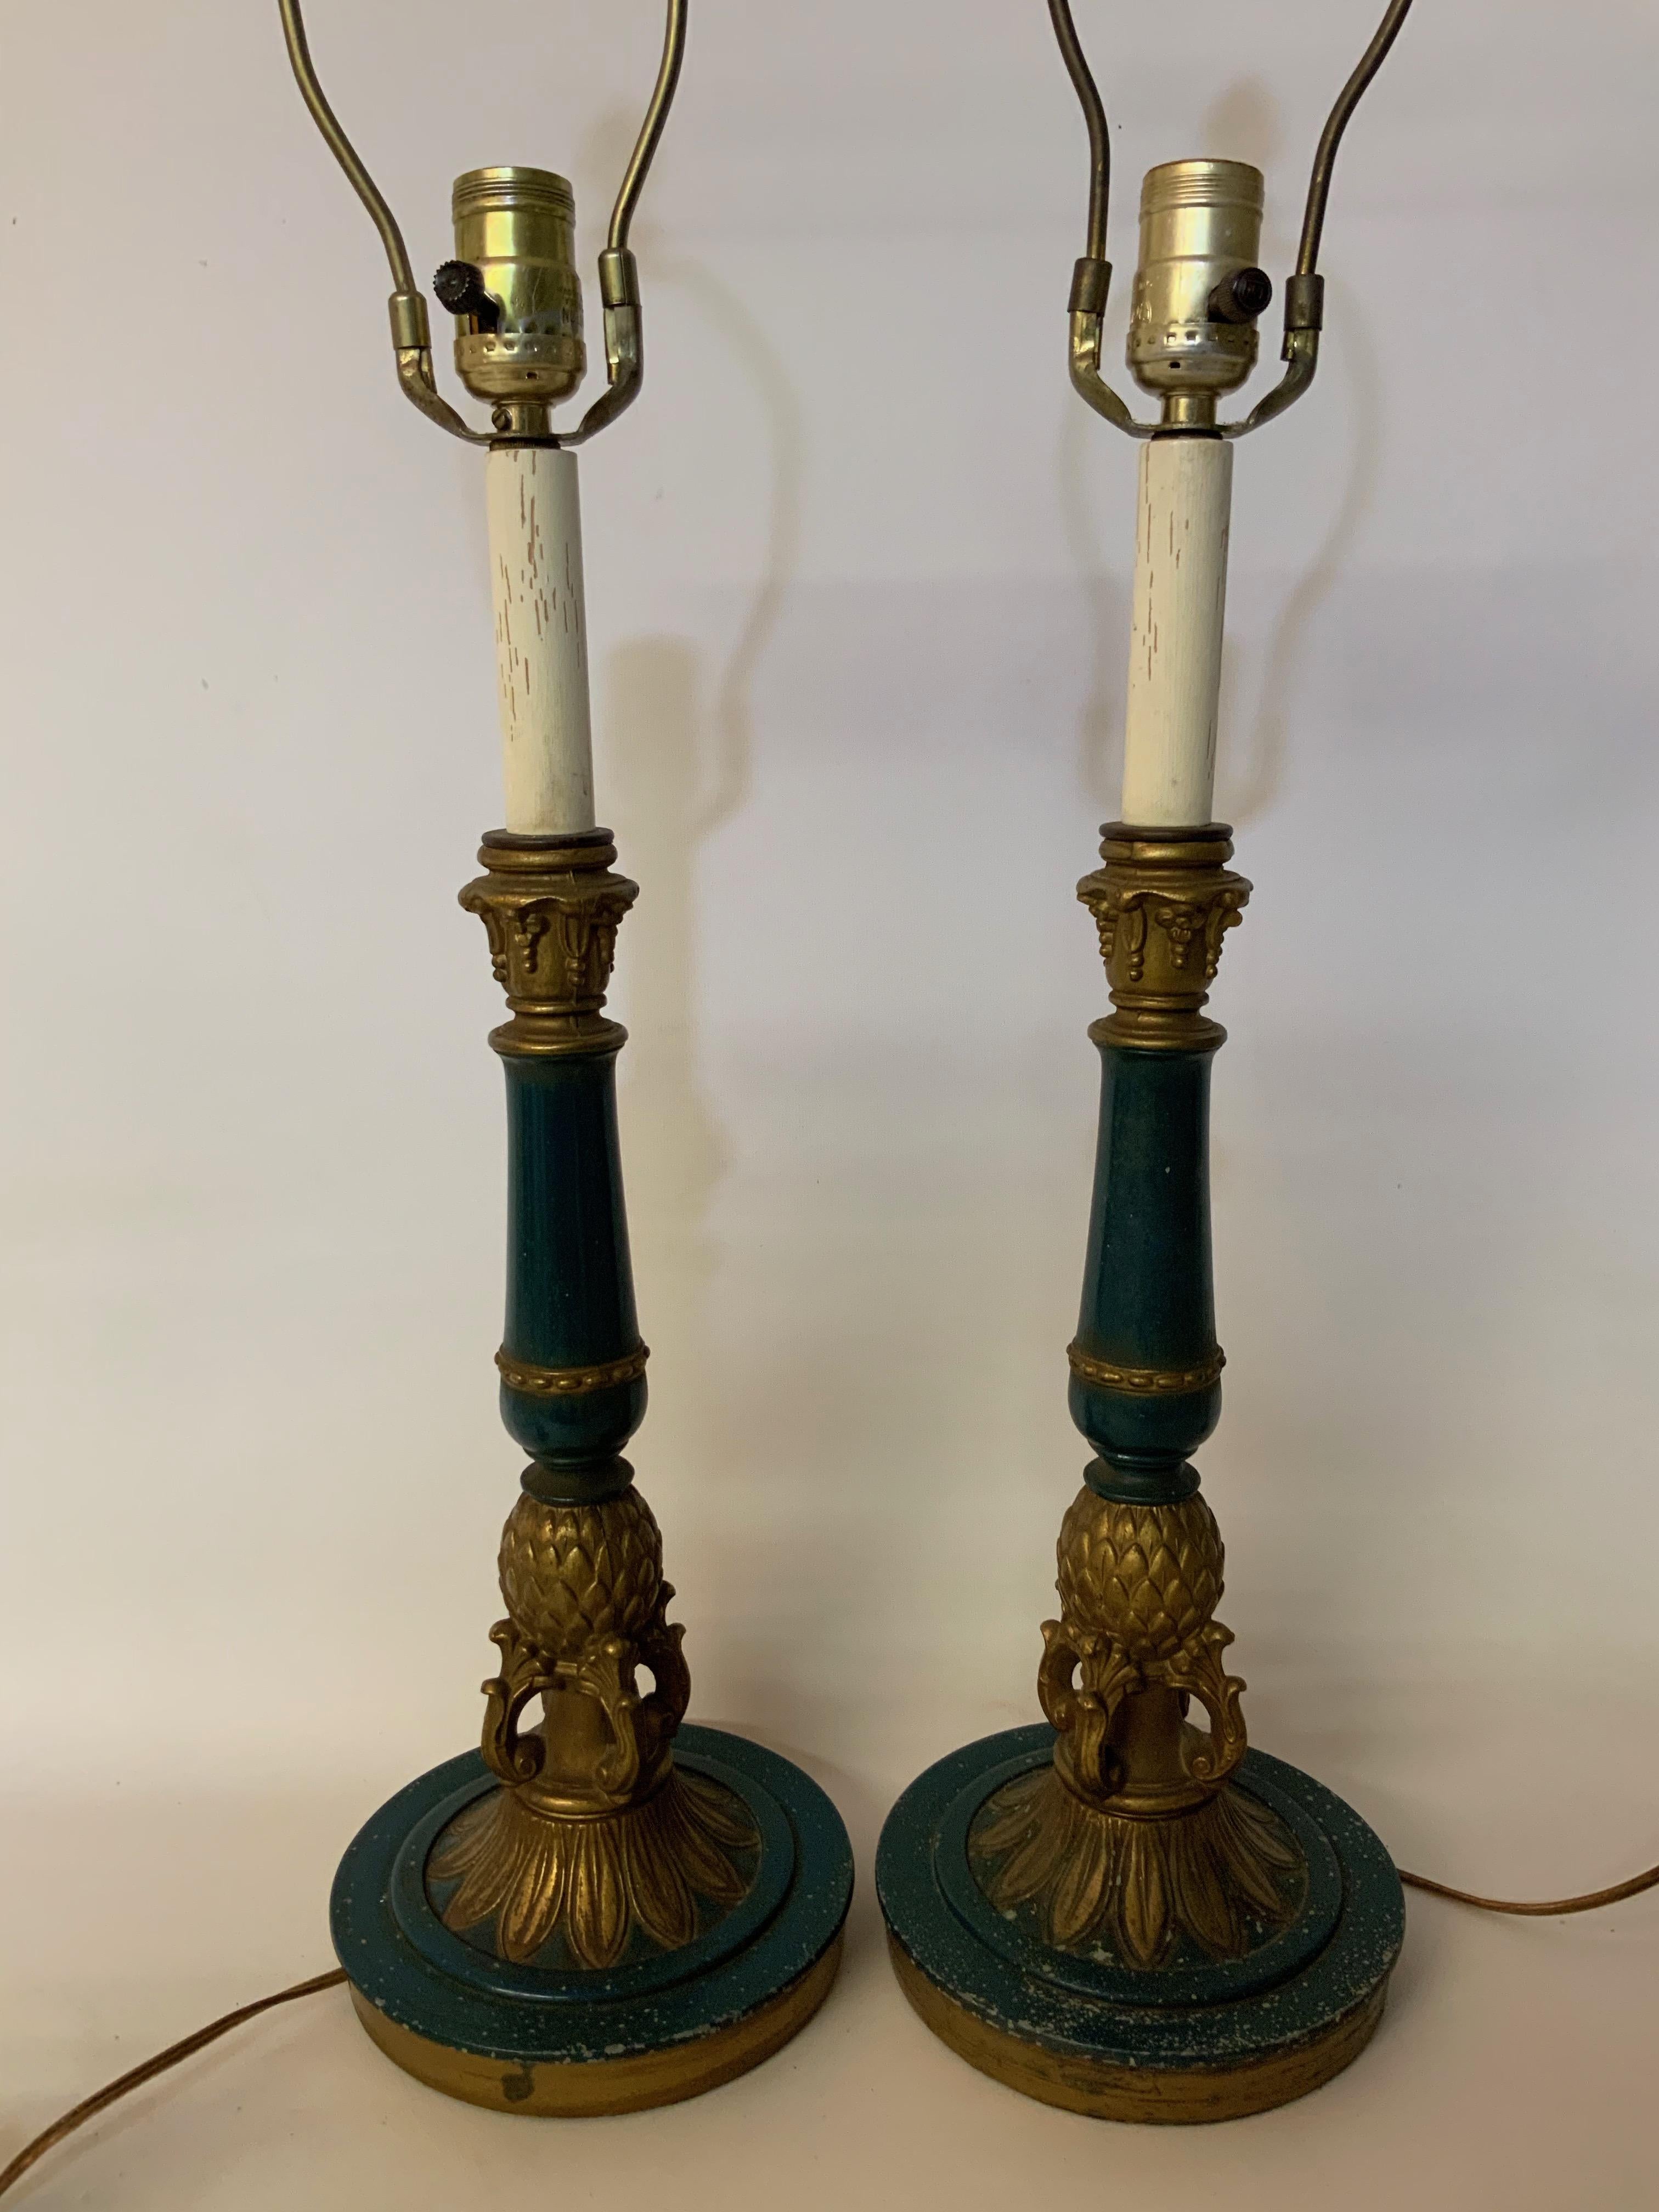 Neoclassical Neoclassic Style Pineapple Column Table Lamps